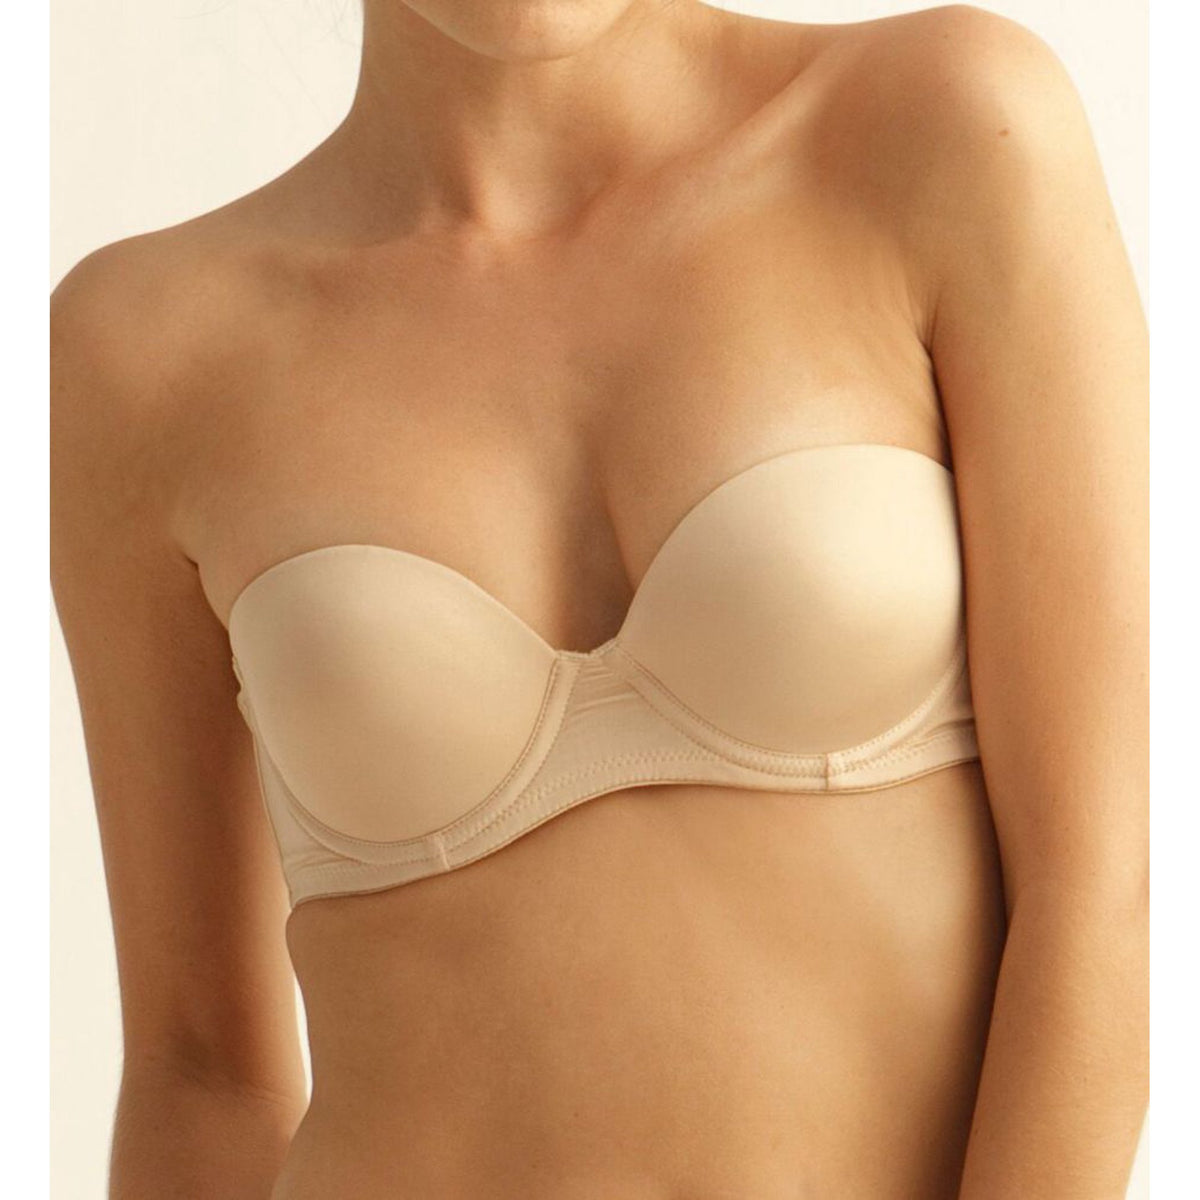 🚨SOLD🚨Brand new Push up padded bra Size : 36B (80B) Color : Nude